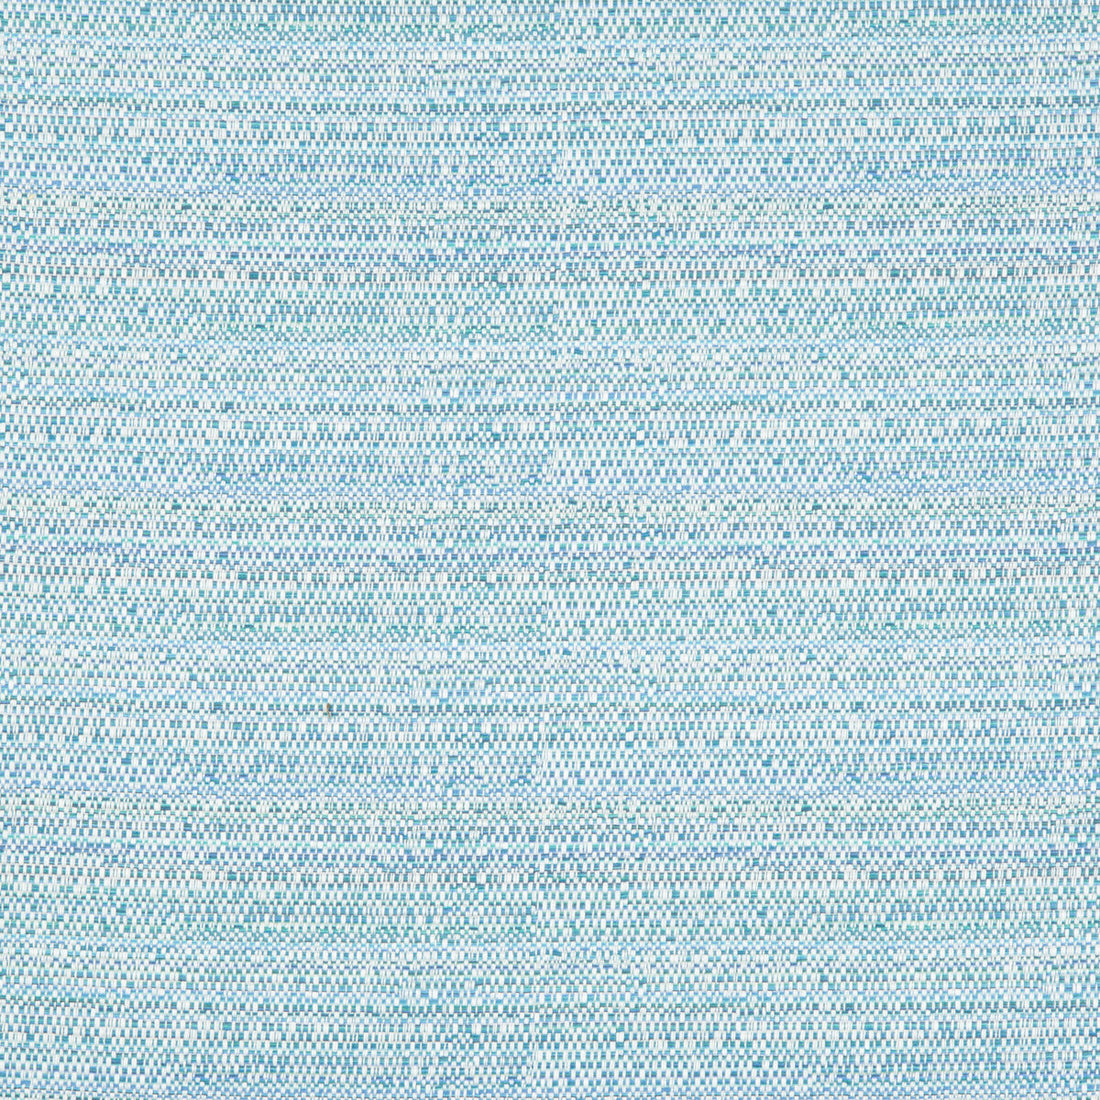 Melanger fabric in peacock color - pattern 31695.13.0 - by Kravet Couture in the Echo Indoor Outdoor Ibiza collection